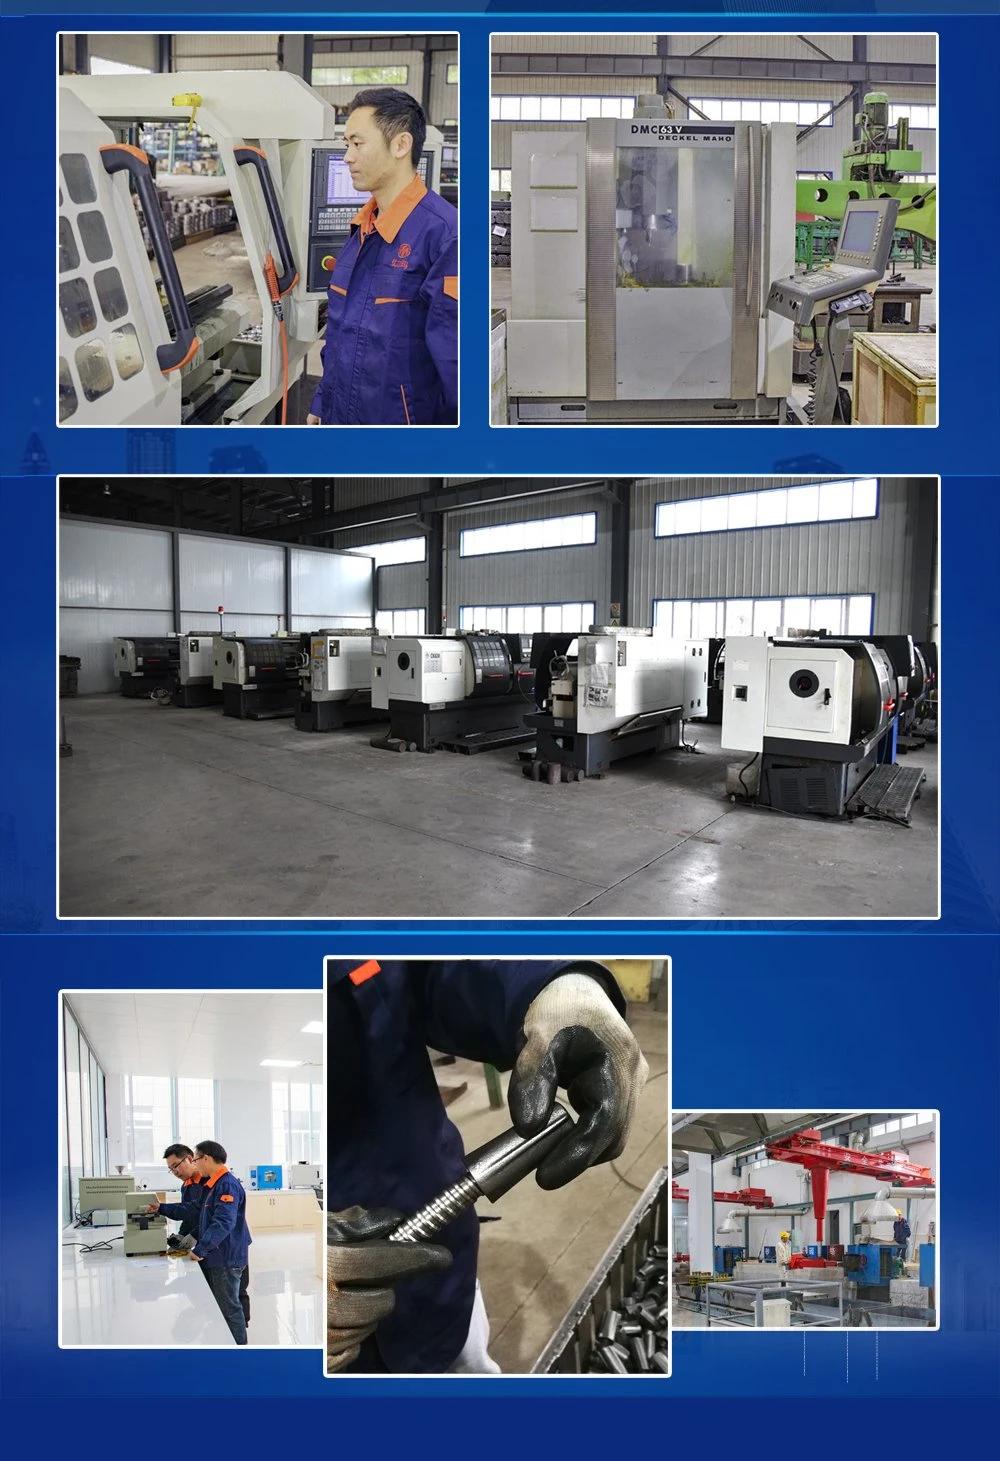 Casting,Accessories,Machining,Component,Power Fitting,Hot Galvanized,Construction,Vehicle,Train,Bus,Railway,Underground,Basement,Warehouse,Nuts,Bus,Car,Mating